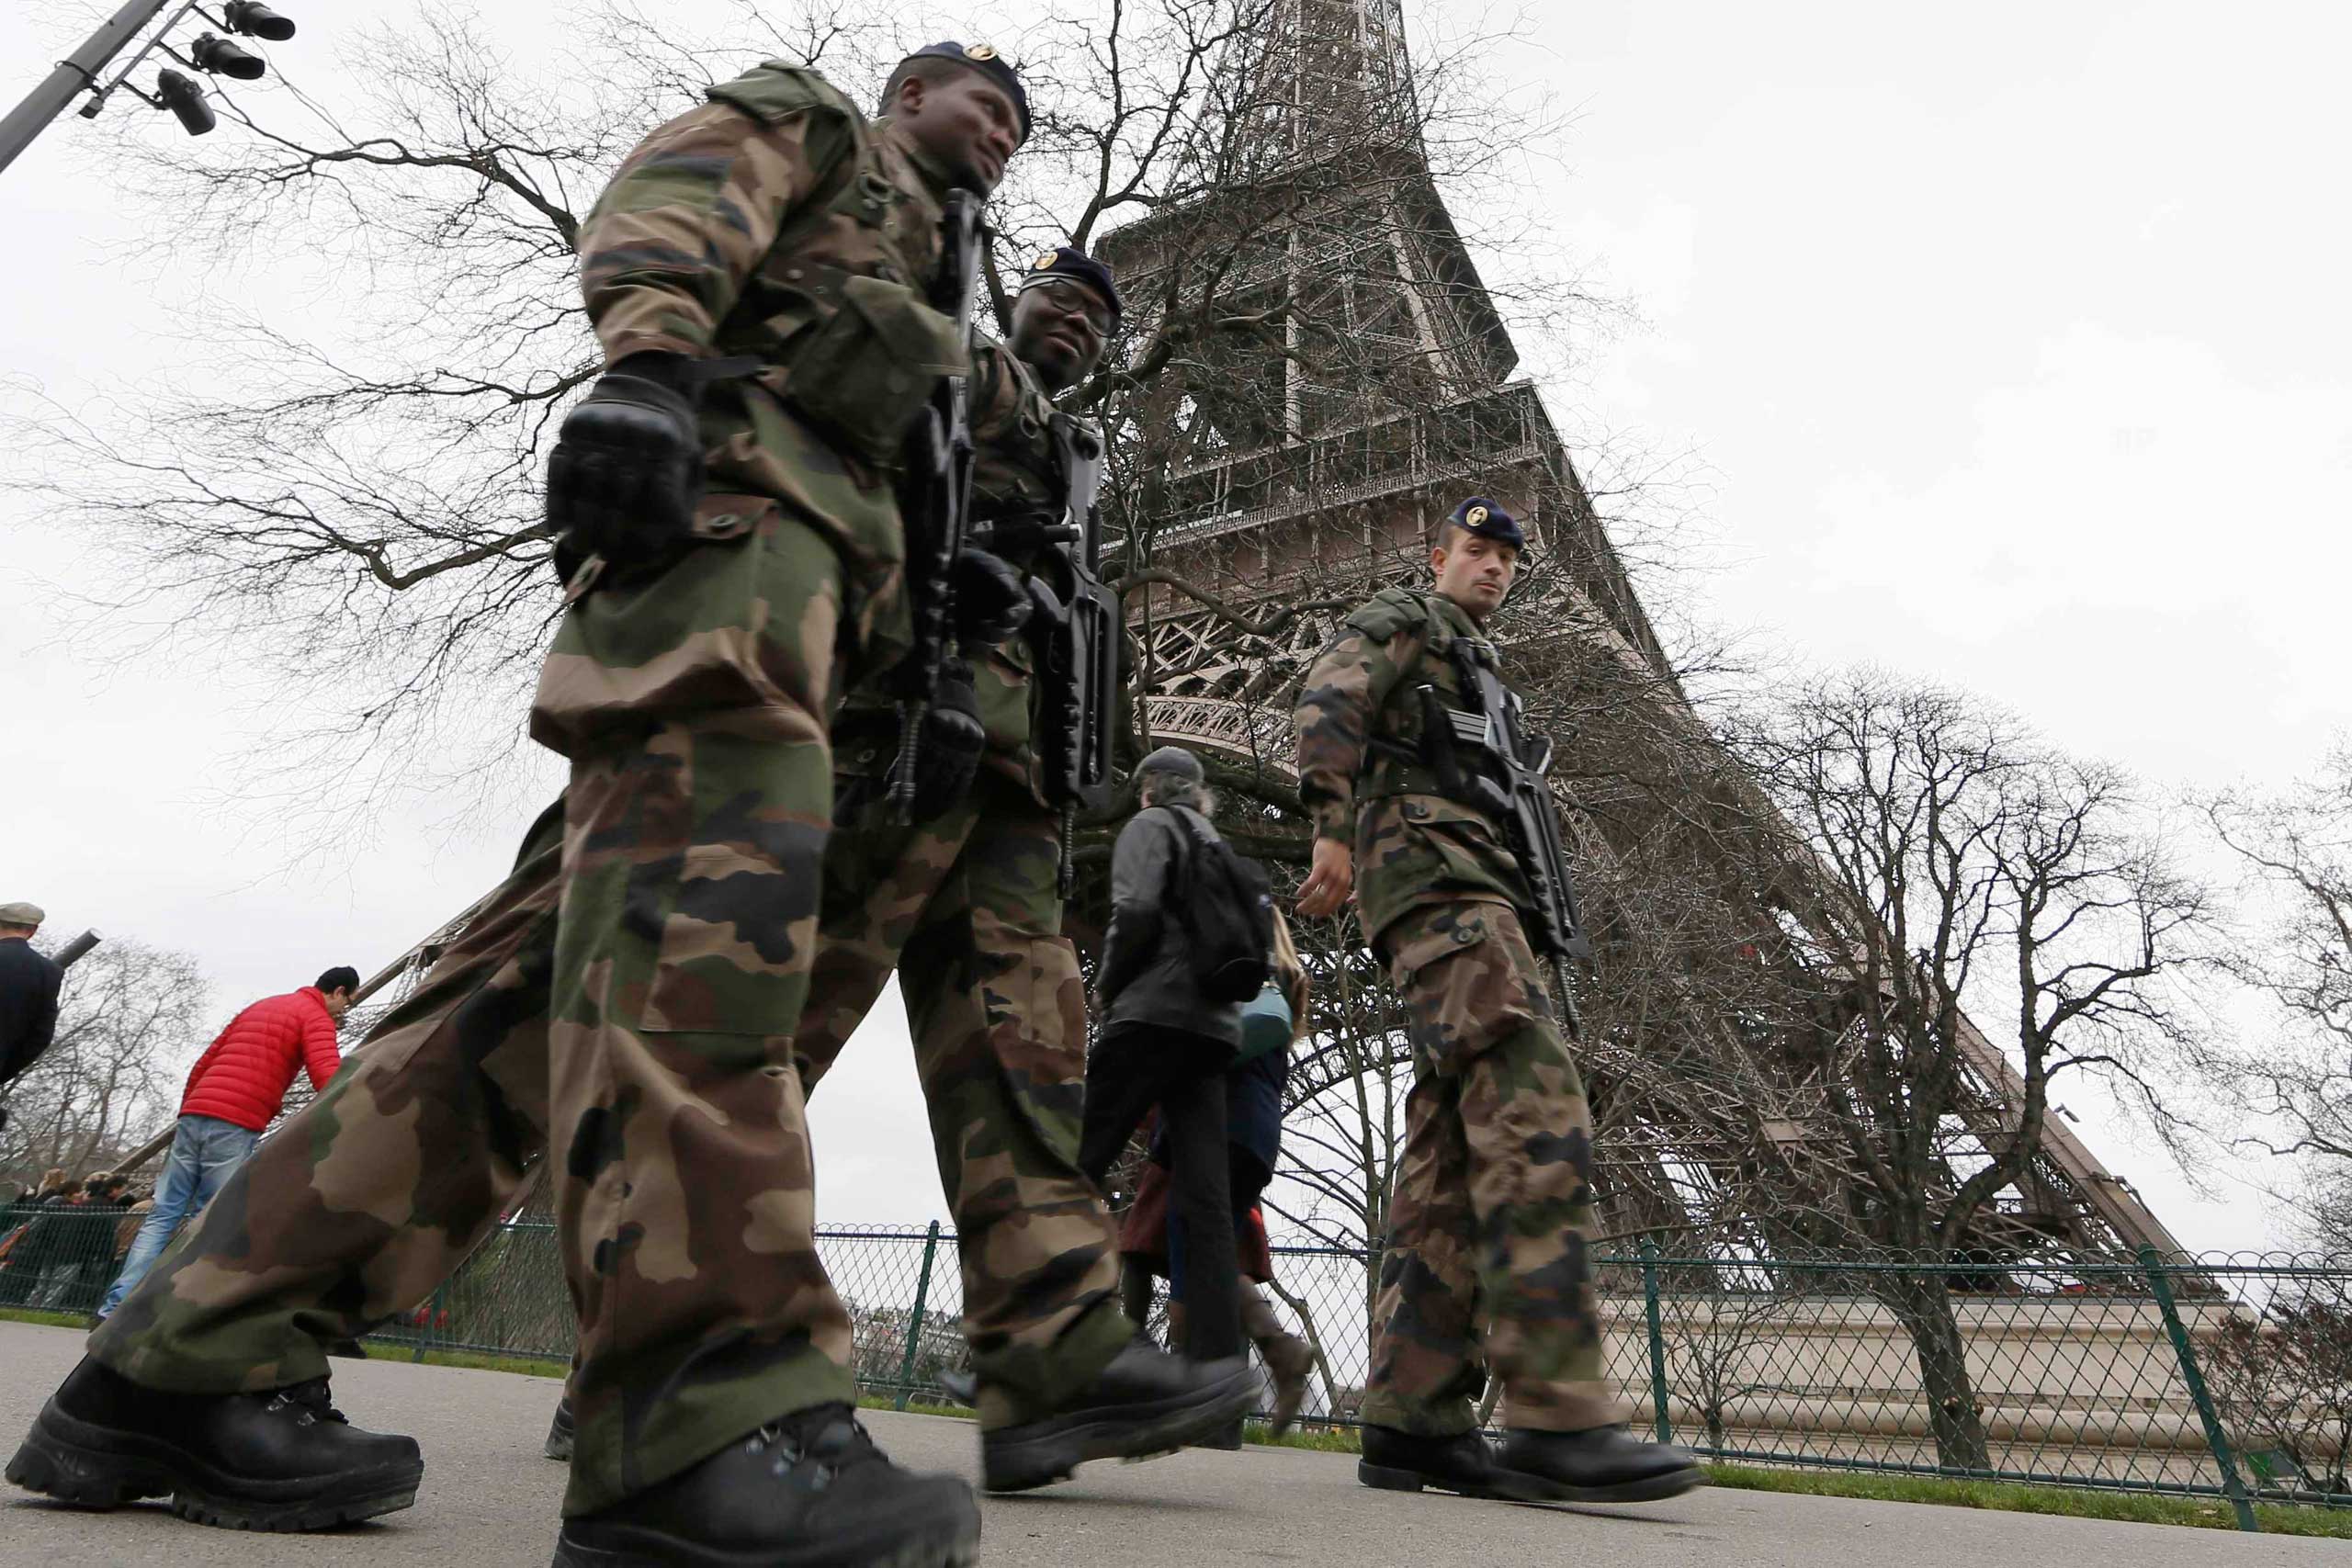 French soldiers patrol near the Eiffel Tower in Paris as part of the "Vigipirate" security plan on Dec. 23, 2014. (Gonzalo Fuentes—Reuters)